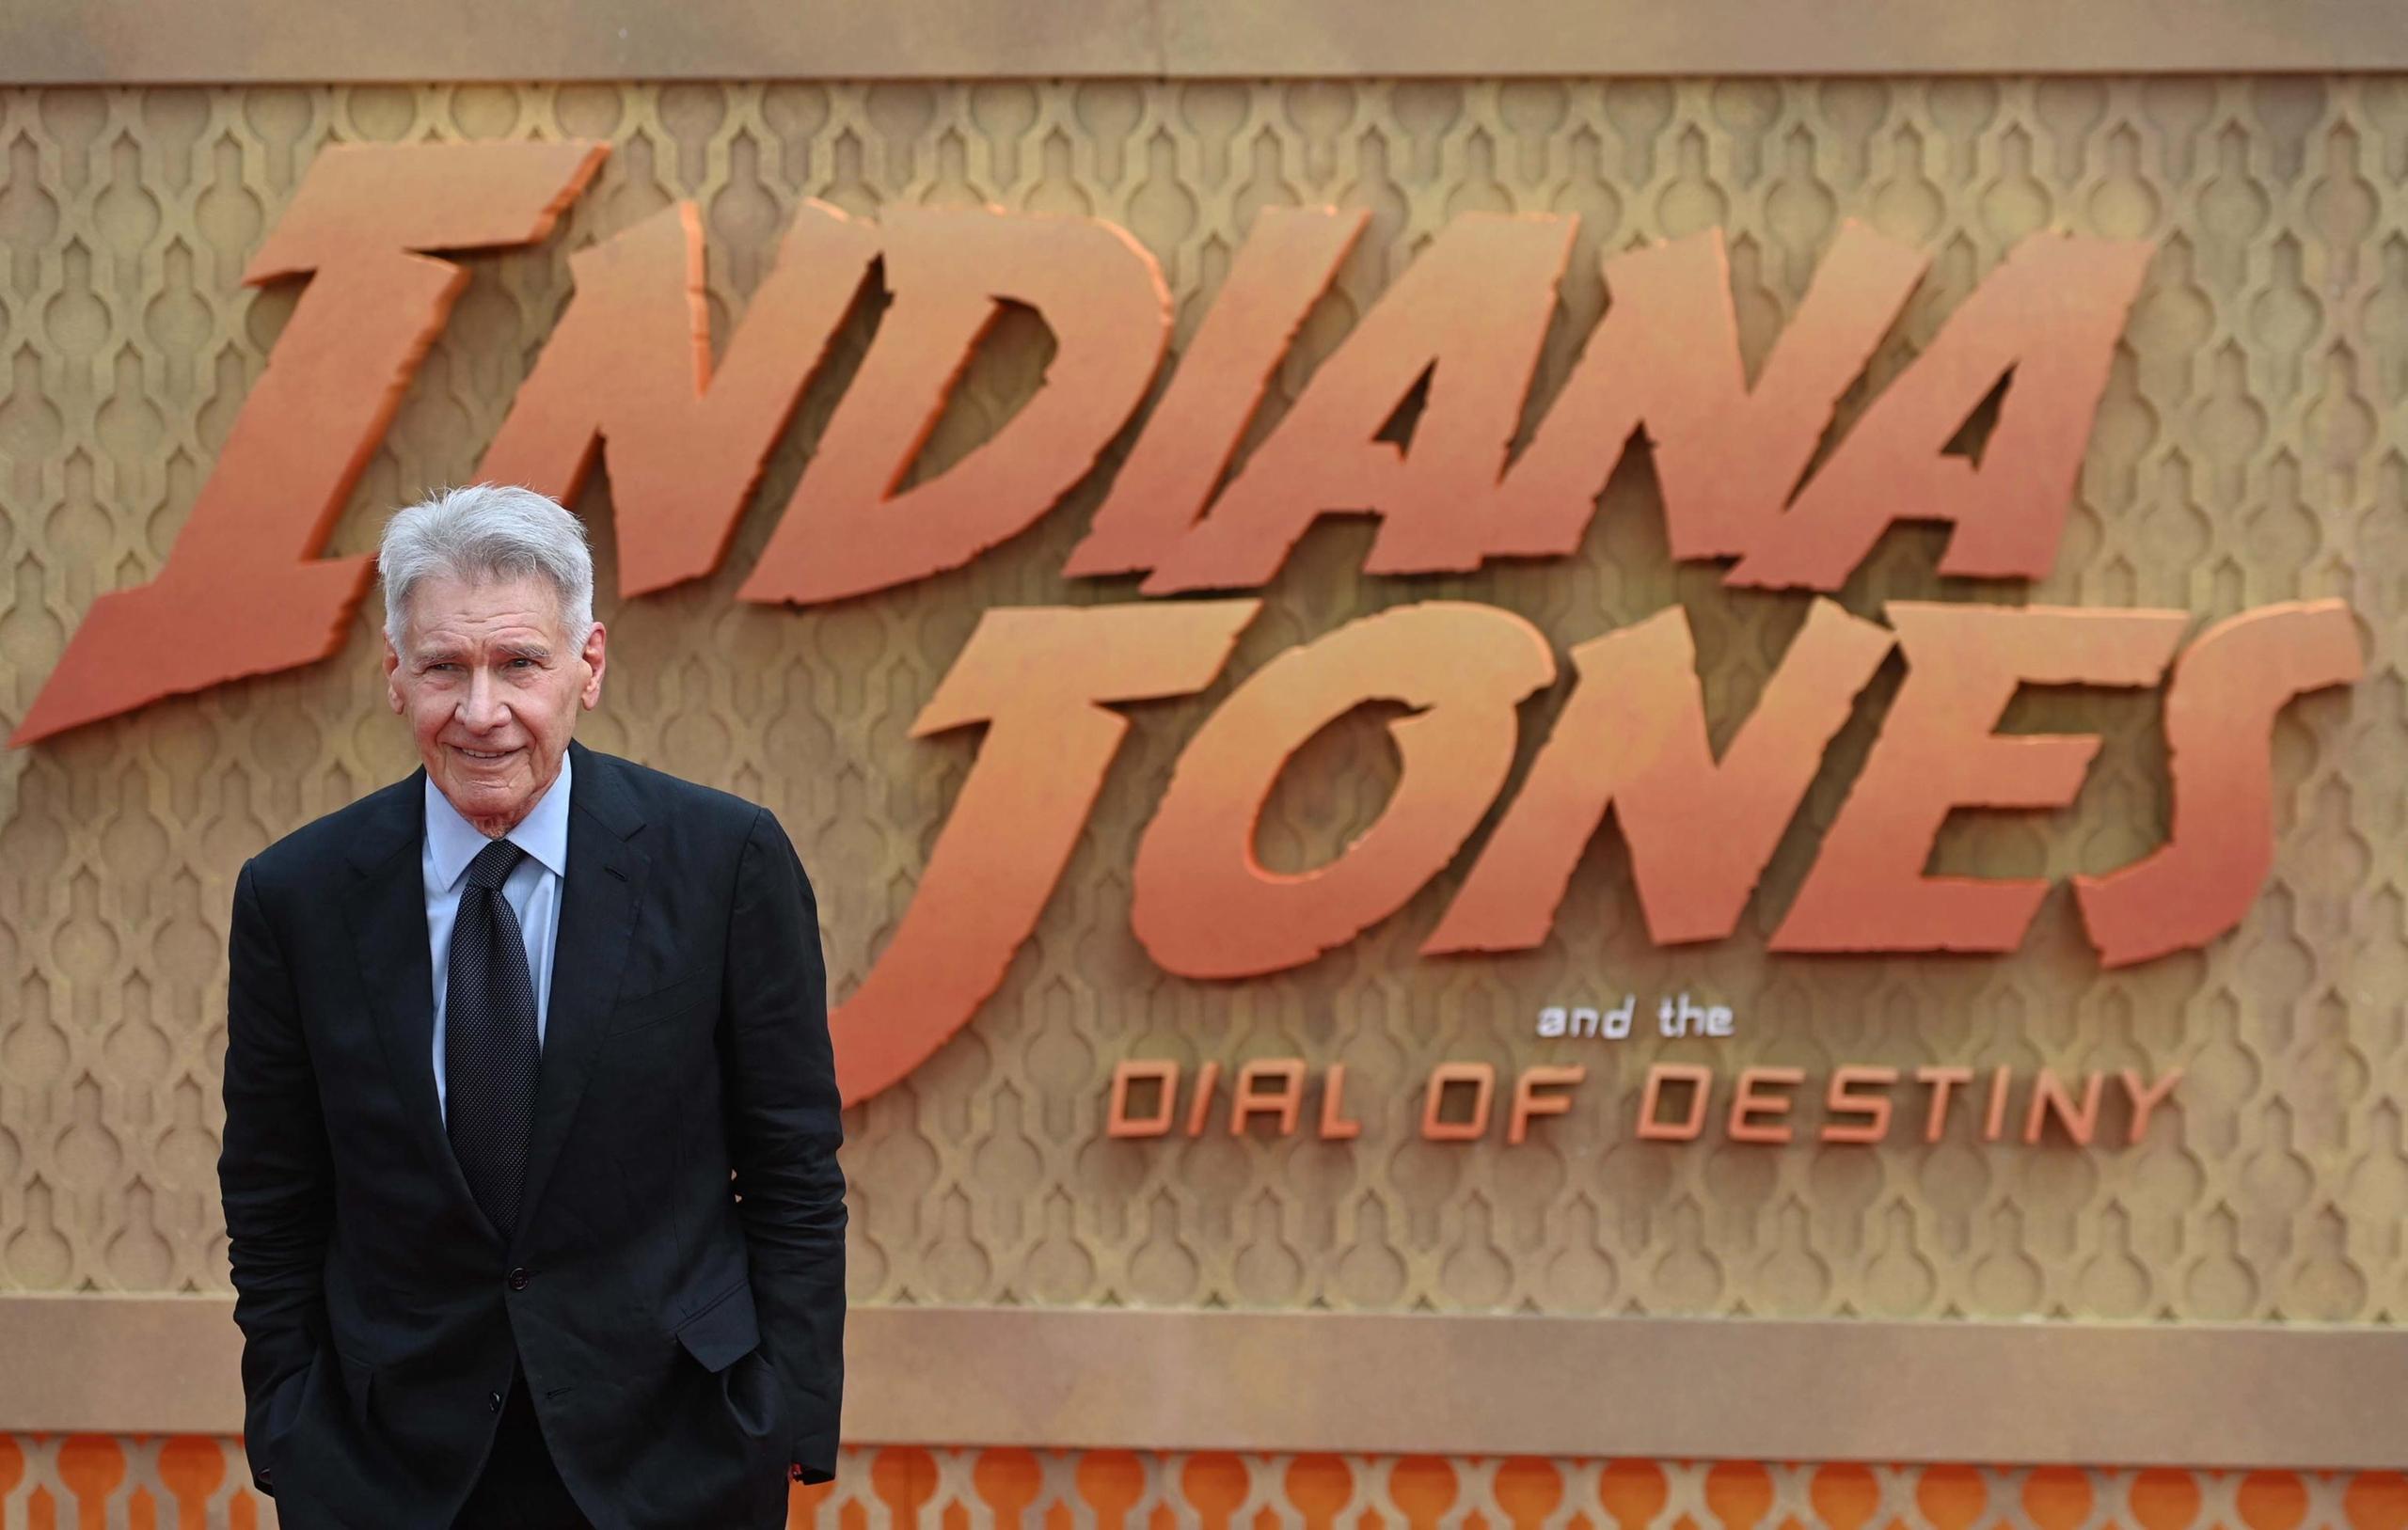 Indiana Jones debuted at the top of the US box office, but did not break through